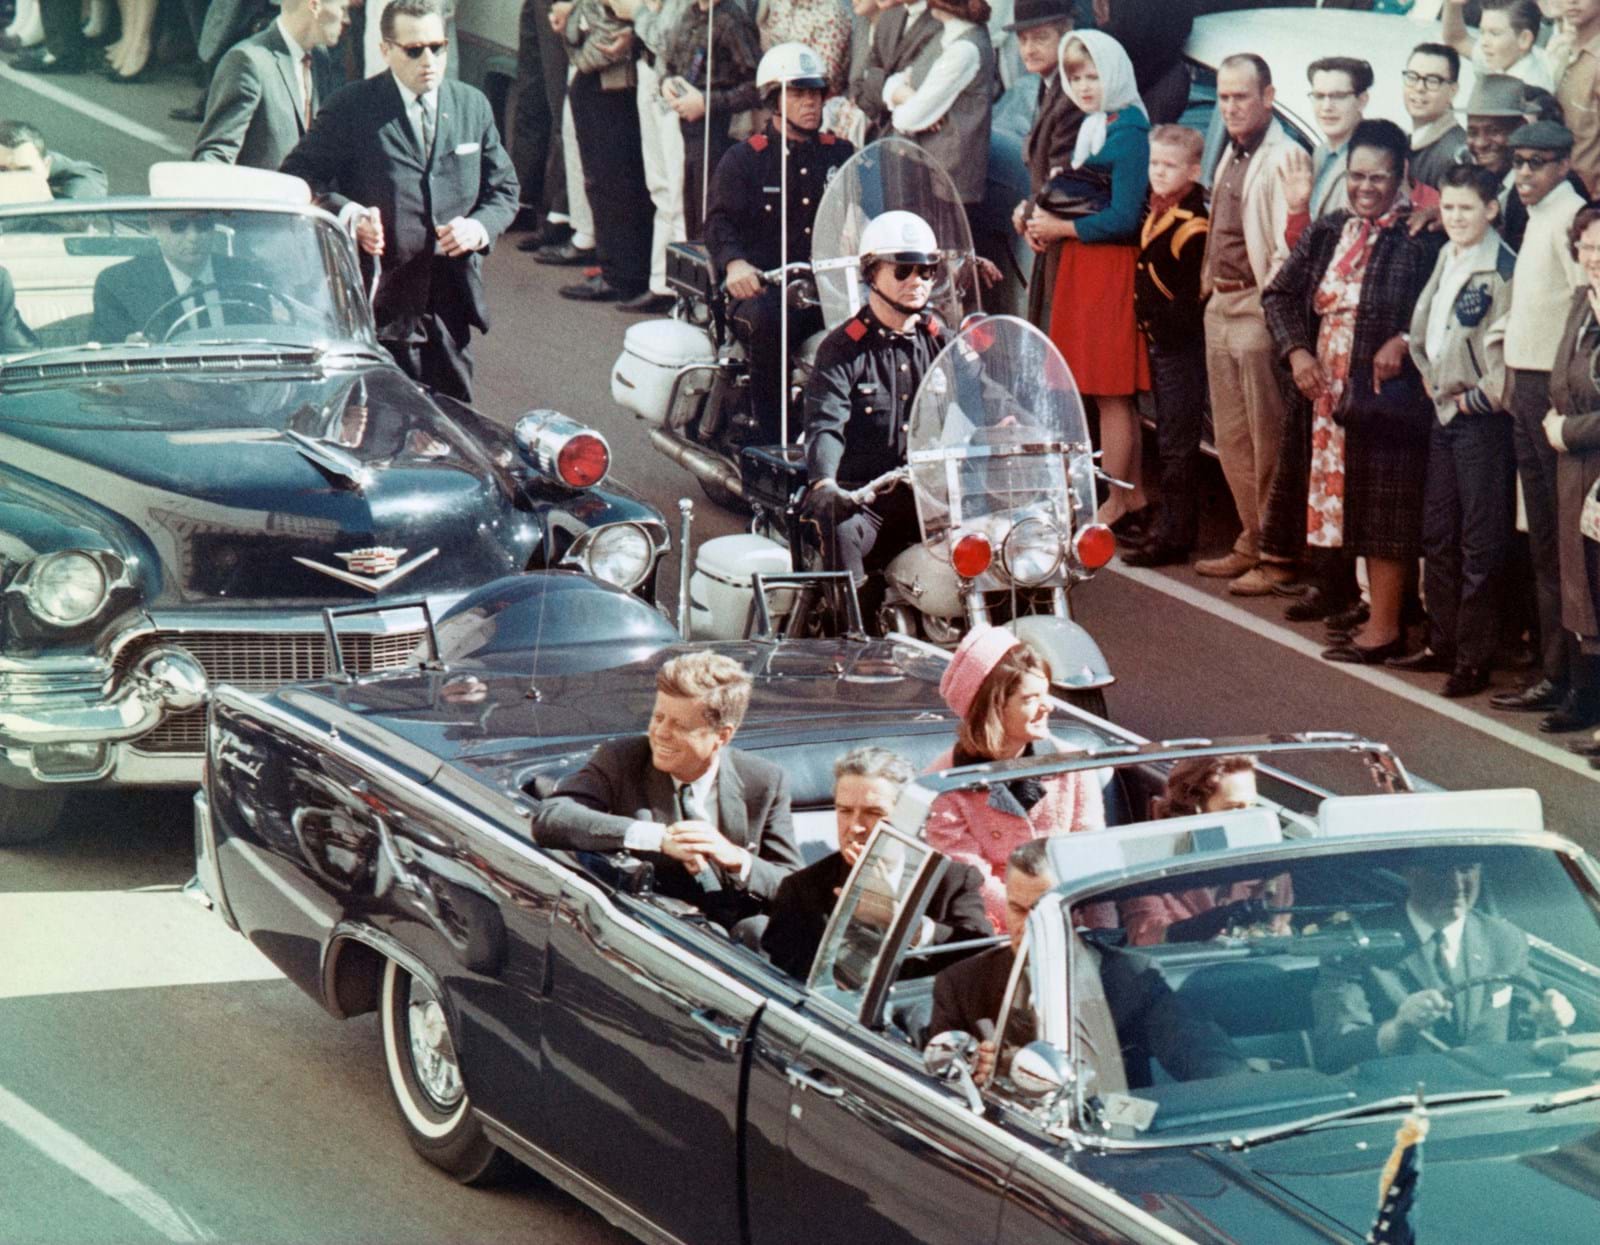 Passion Distribution partners with ITV on documentary 'JFK: The Home Movie That Changed the World'